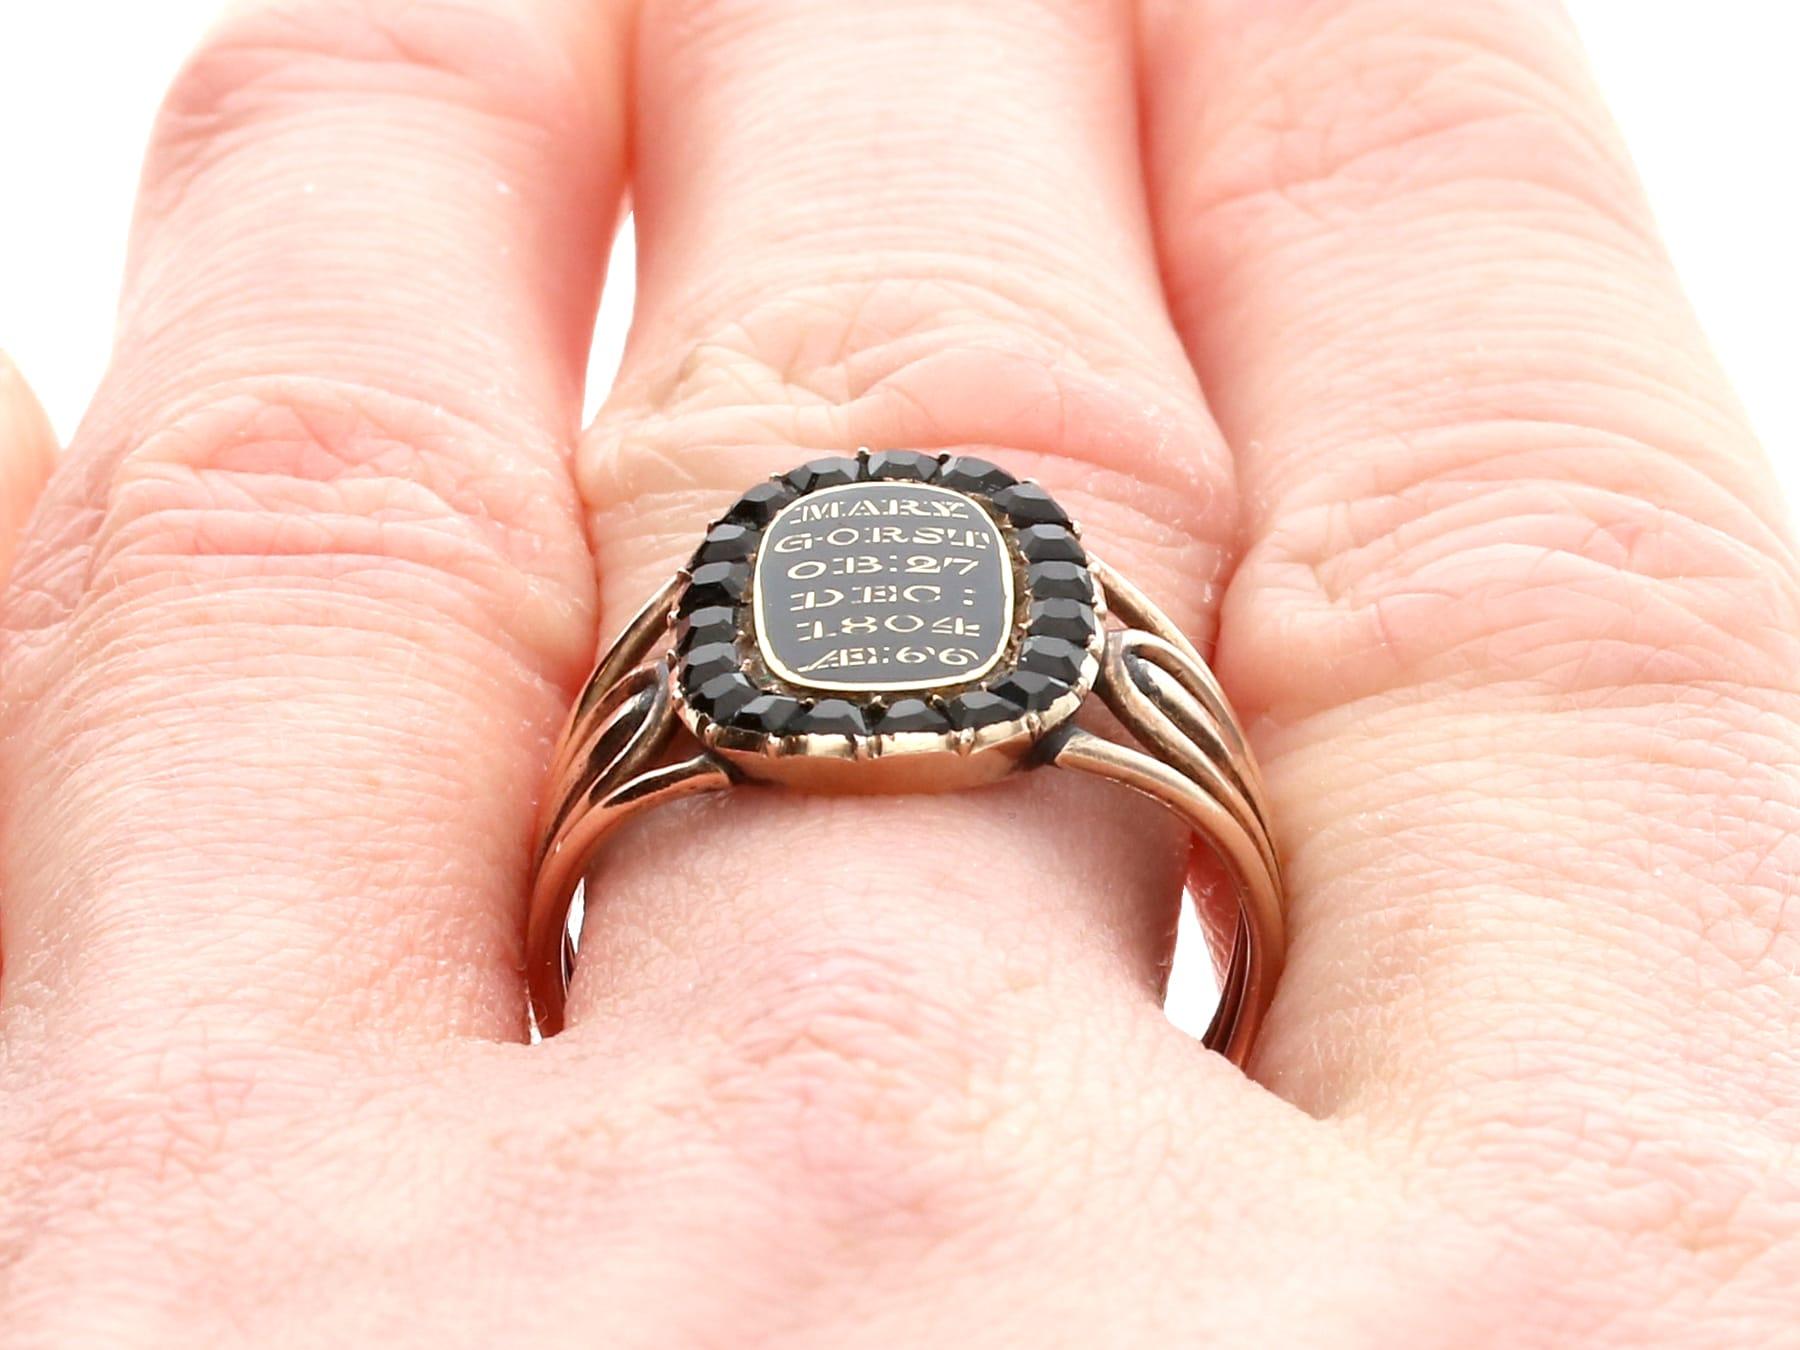 Antique 0.57Ct Jet, Black Enamel and 9k Yellow Gold Mourning Ring Circa 1804 For Sale 7